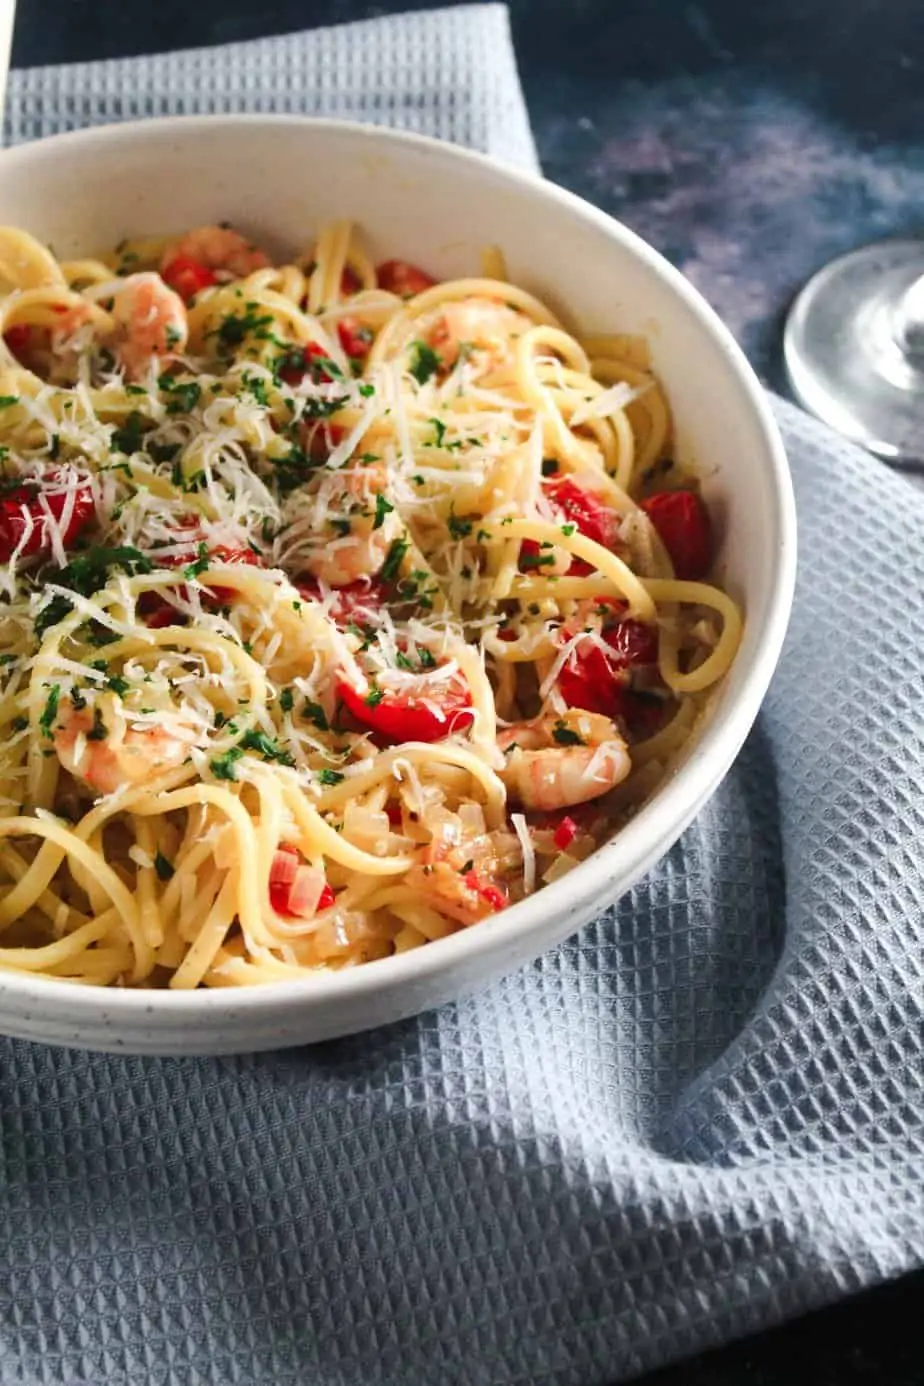 Chilli Prawn Linguine with Tomatoes and White Wine